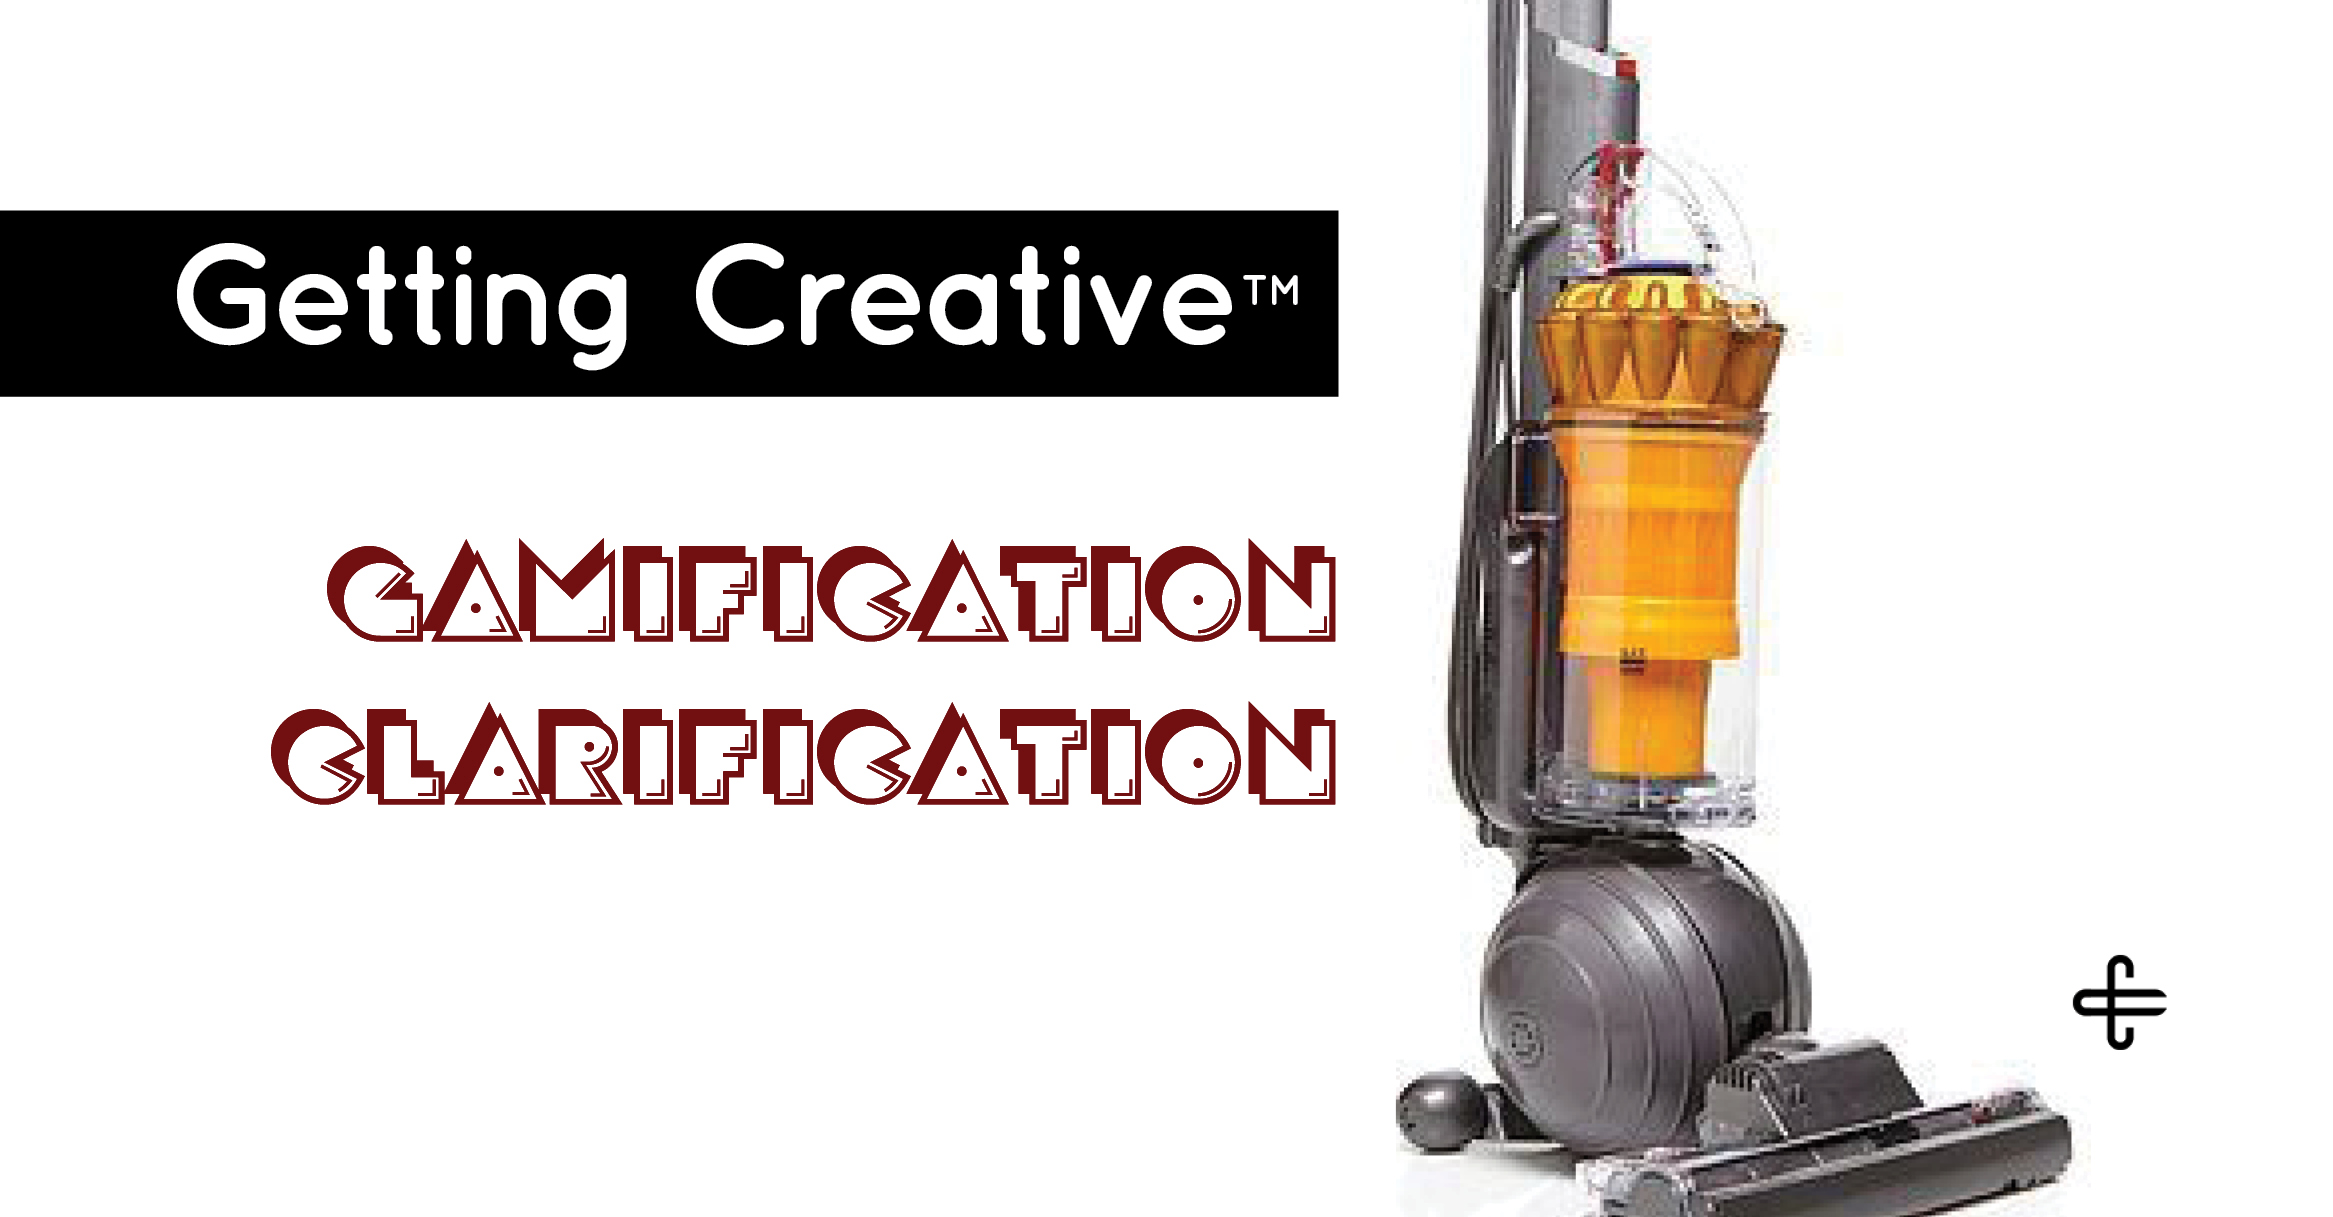 Getting-Creative-Gamification-Clarification-Blog-Post-by-D.P.-Knudten-Collaborator-Creative